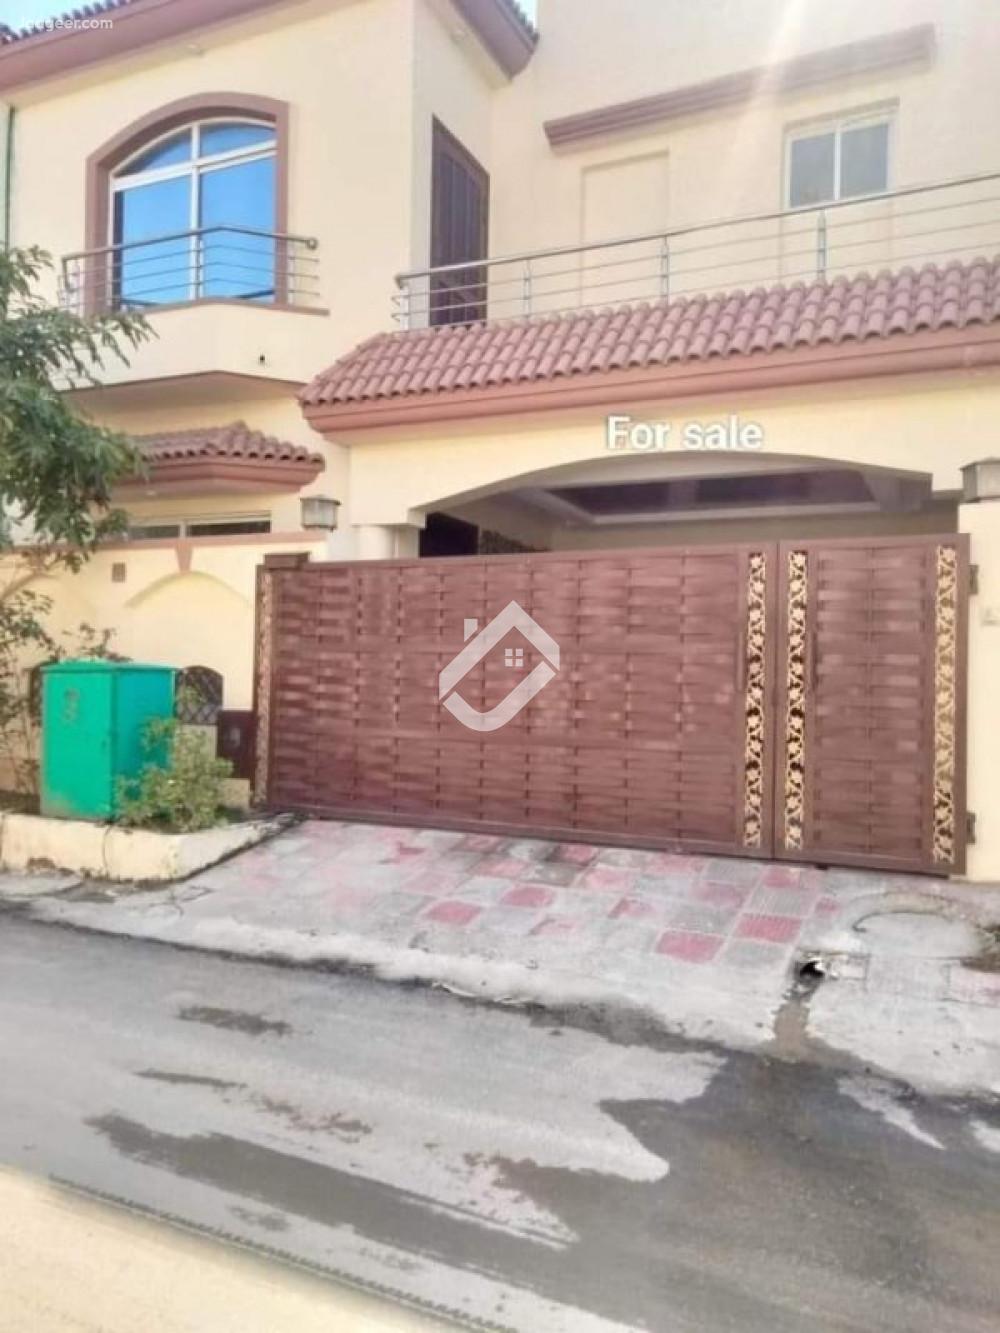 View  7 Marla Double Storey House For Sale In Bahria Town Phase-8 Usman Block in Bahria Town Phase-8, Rawalpindi